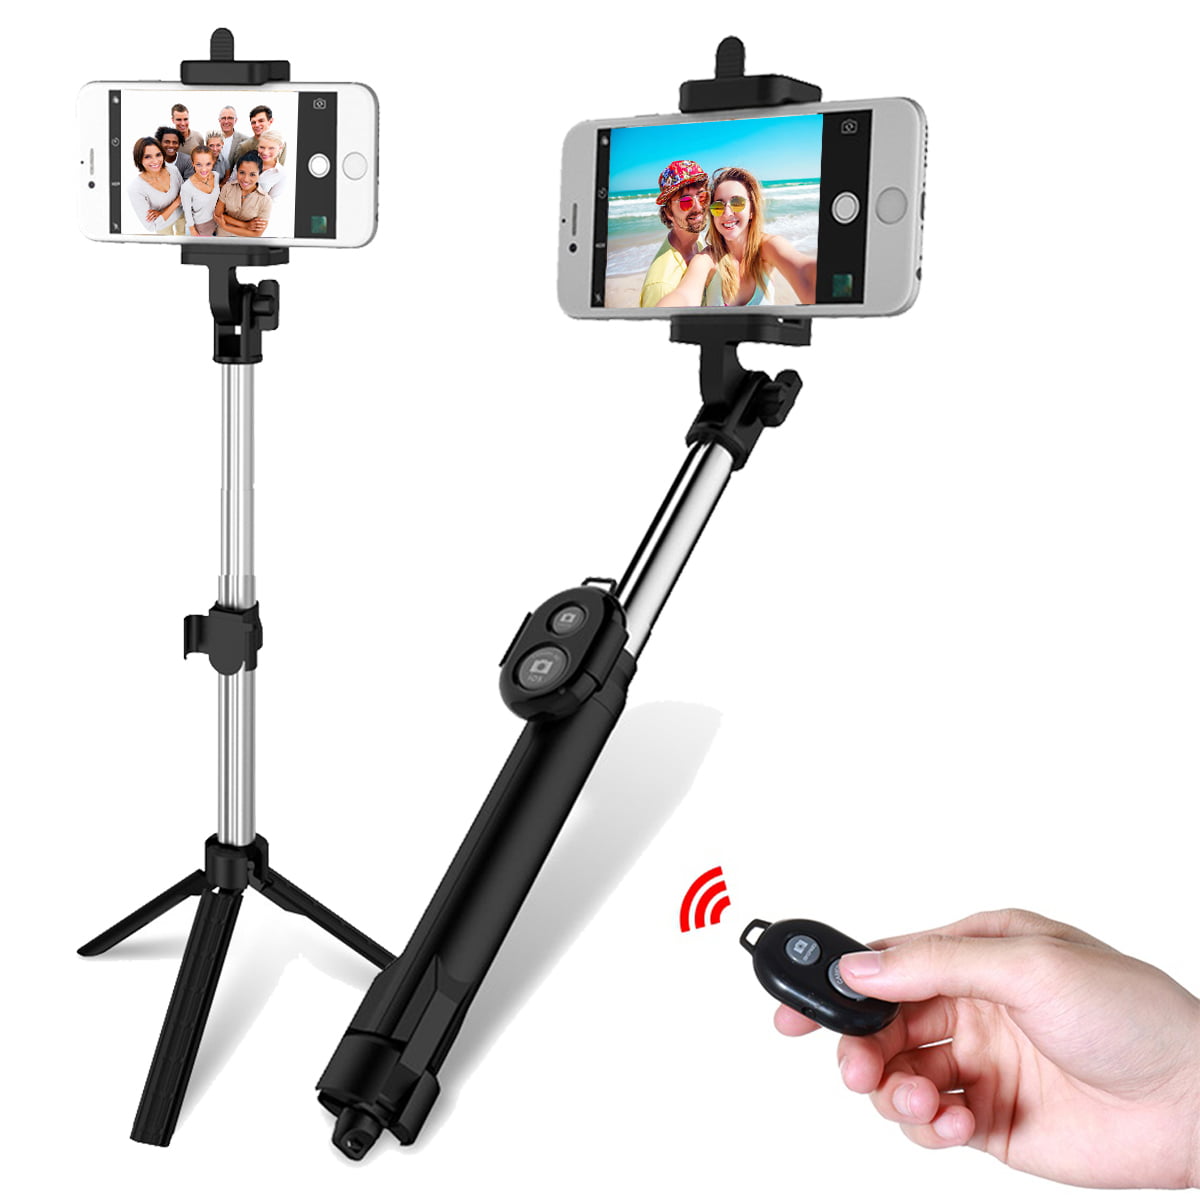 Android Huawei Comter Selfie Stick Extendable Bluetooth Selfie Stick with Detachable Wireless Remote,3 in 1 360° Selfie Stick Tripod Portable for i-phone 11/11 Pro/X/XR/XS Max Samsung,etc.